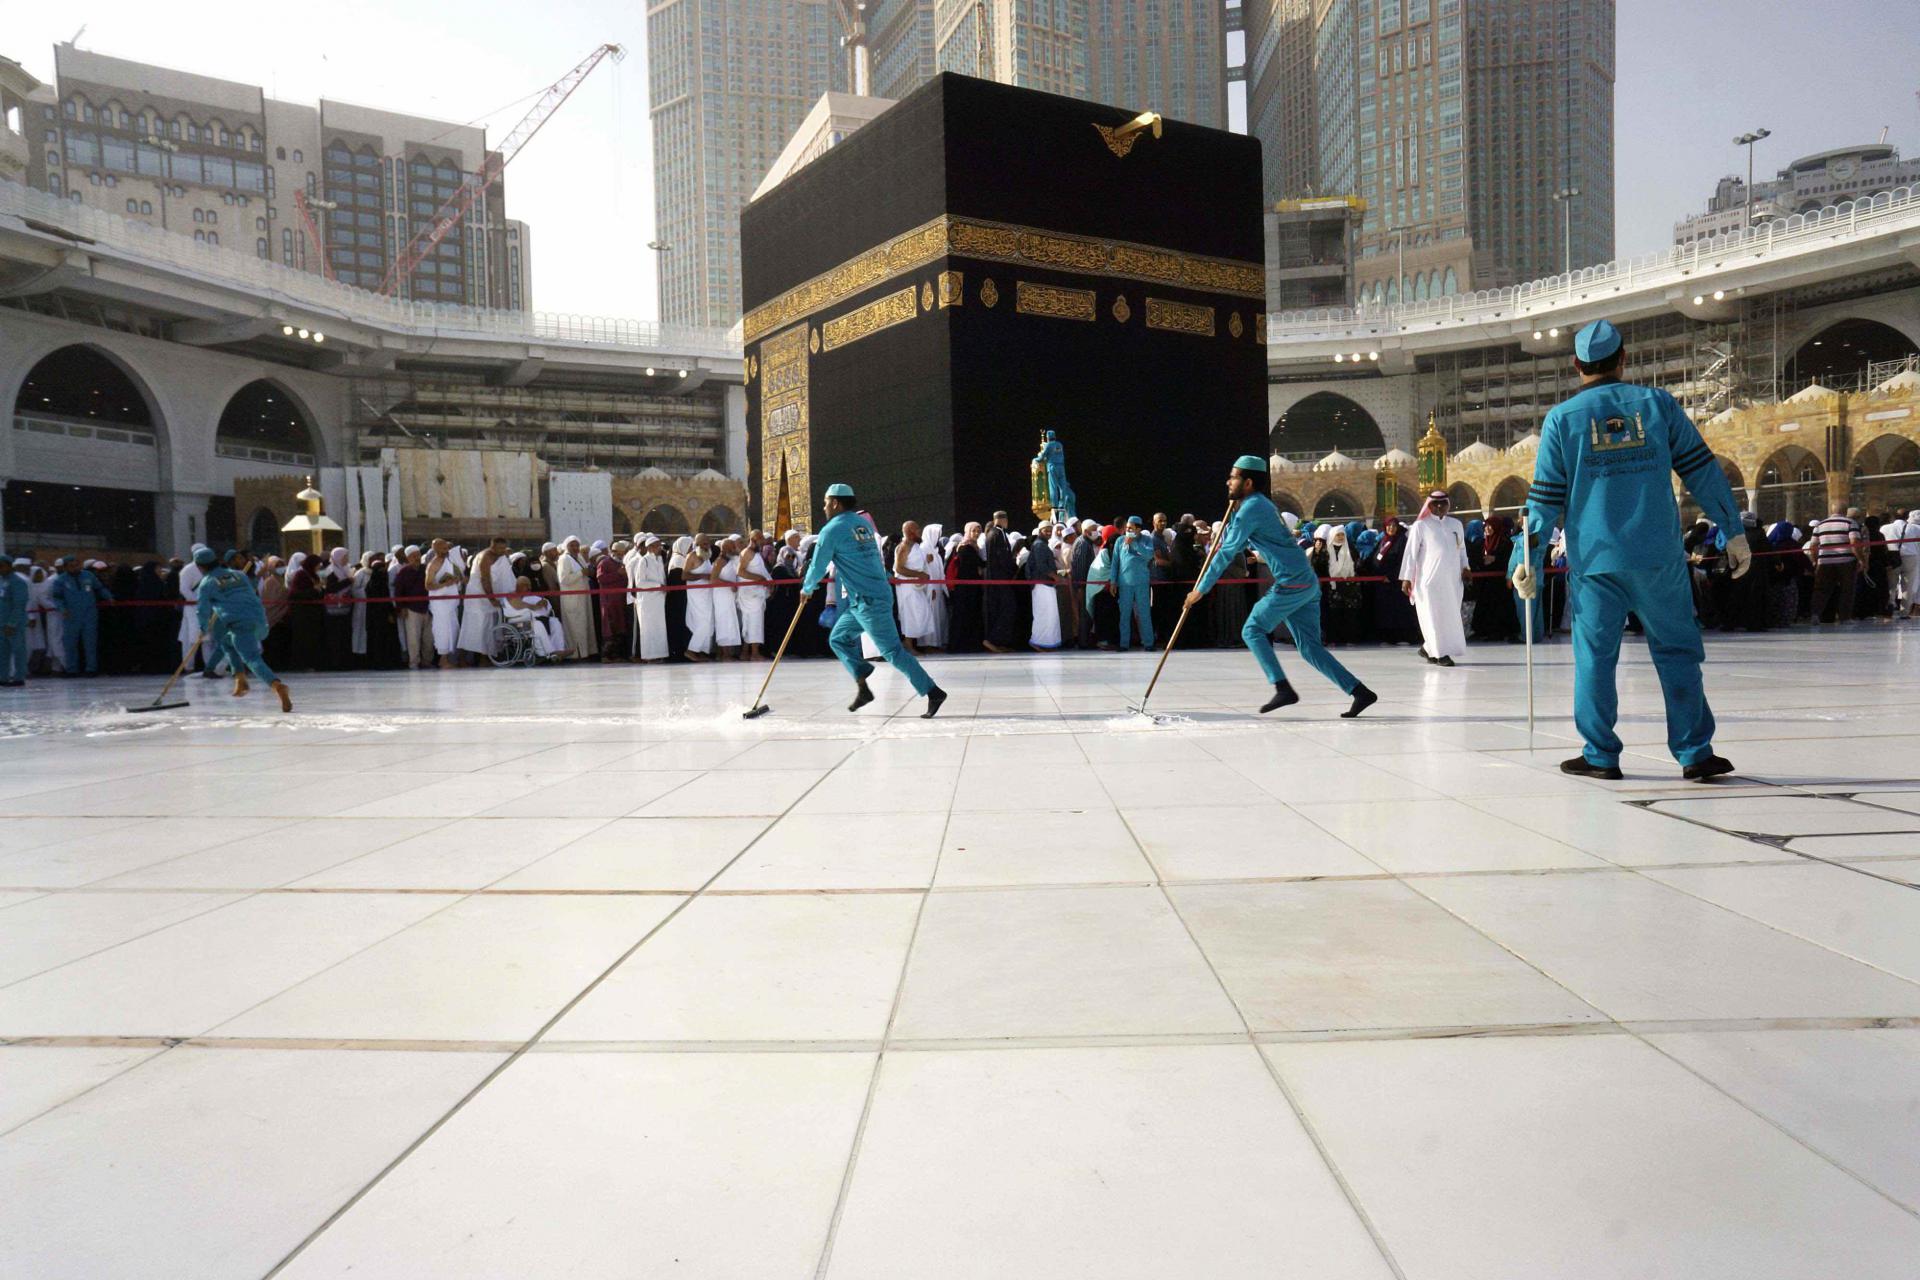 Workers sterilize the ground in front of the Kaaba